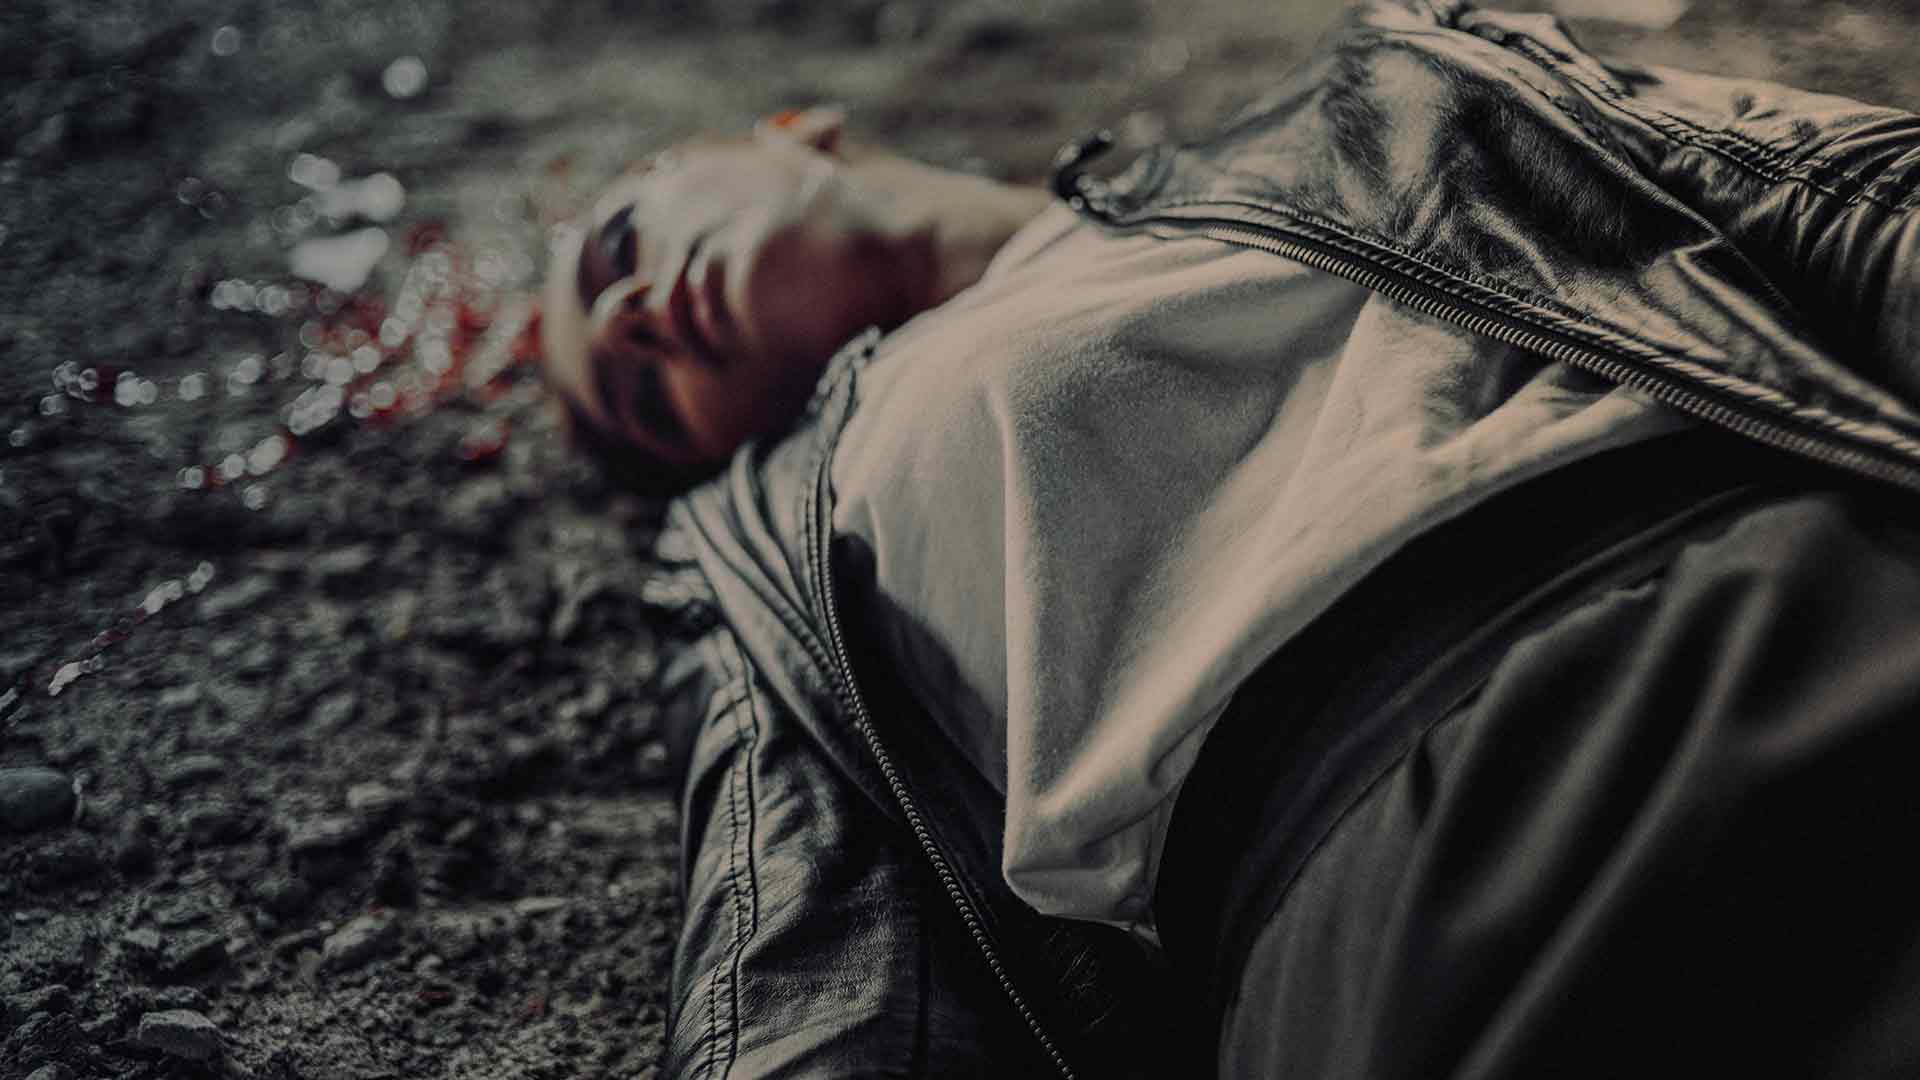 a woman on the floor who experienced an opioid overdose